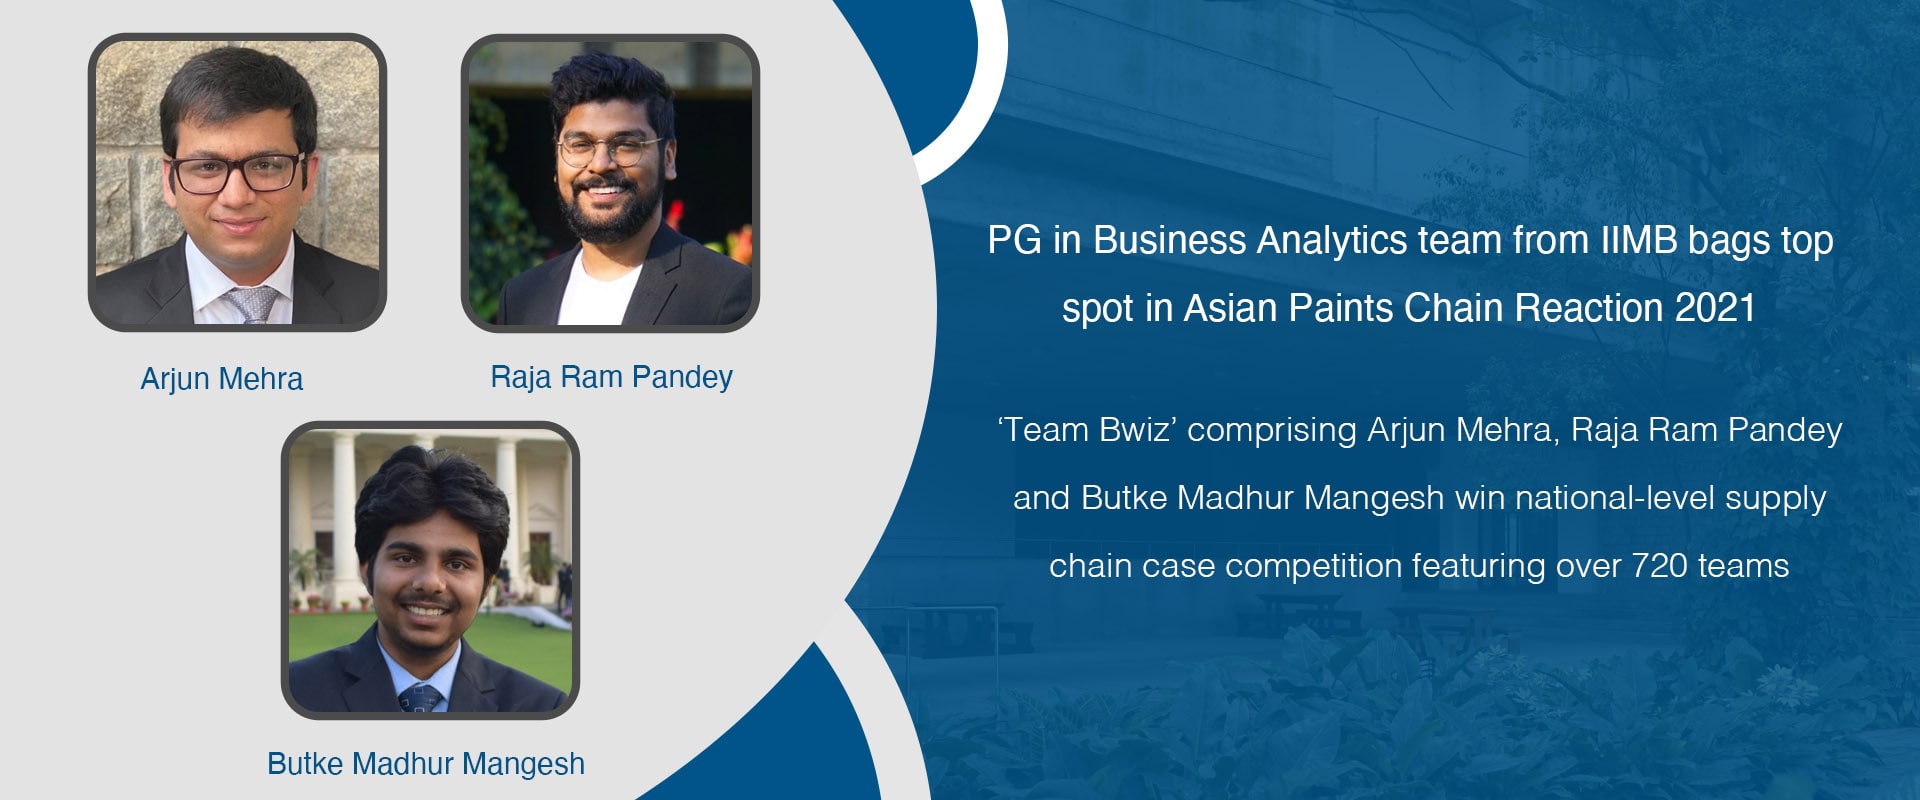 PG in Business Analytics team from IIMB bags top spot in Asian Paints Chain Reaction 2021